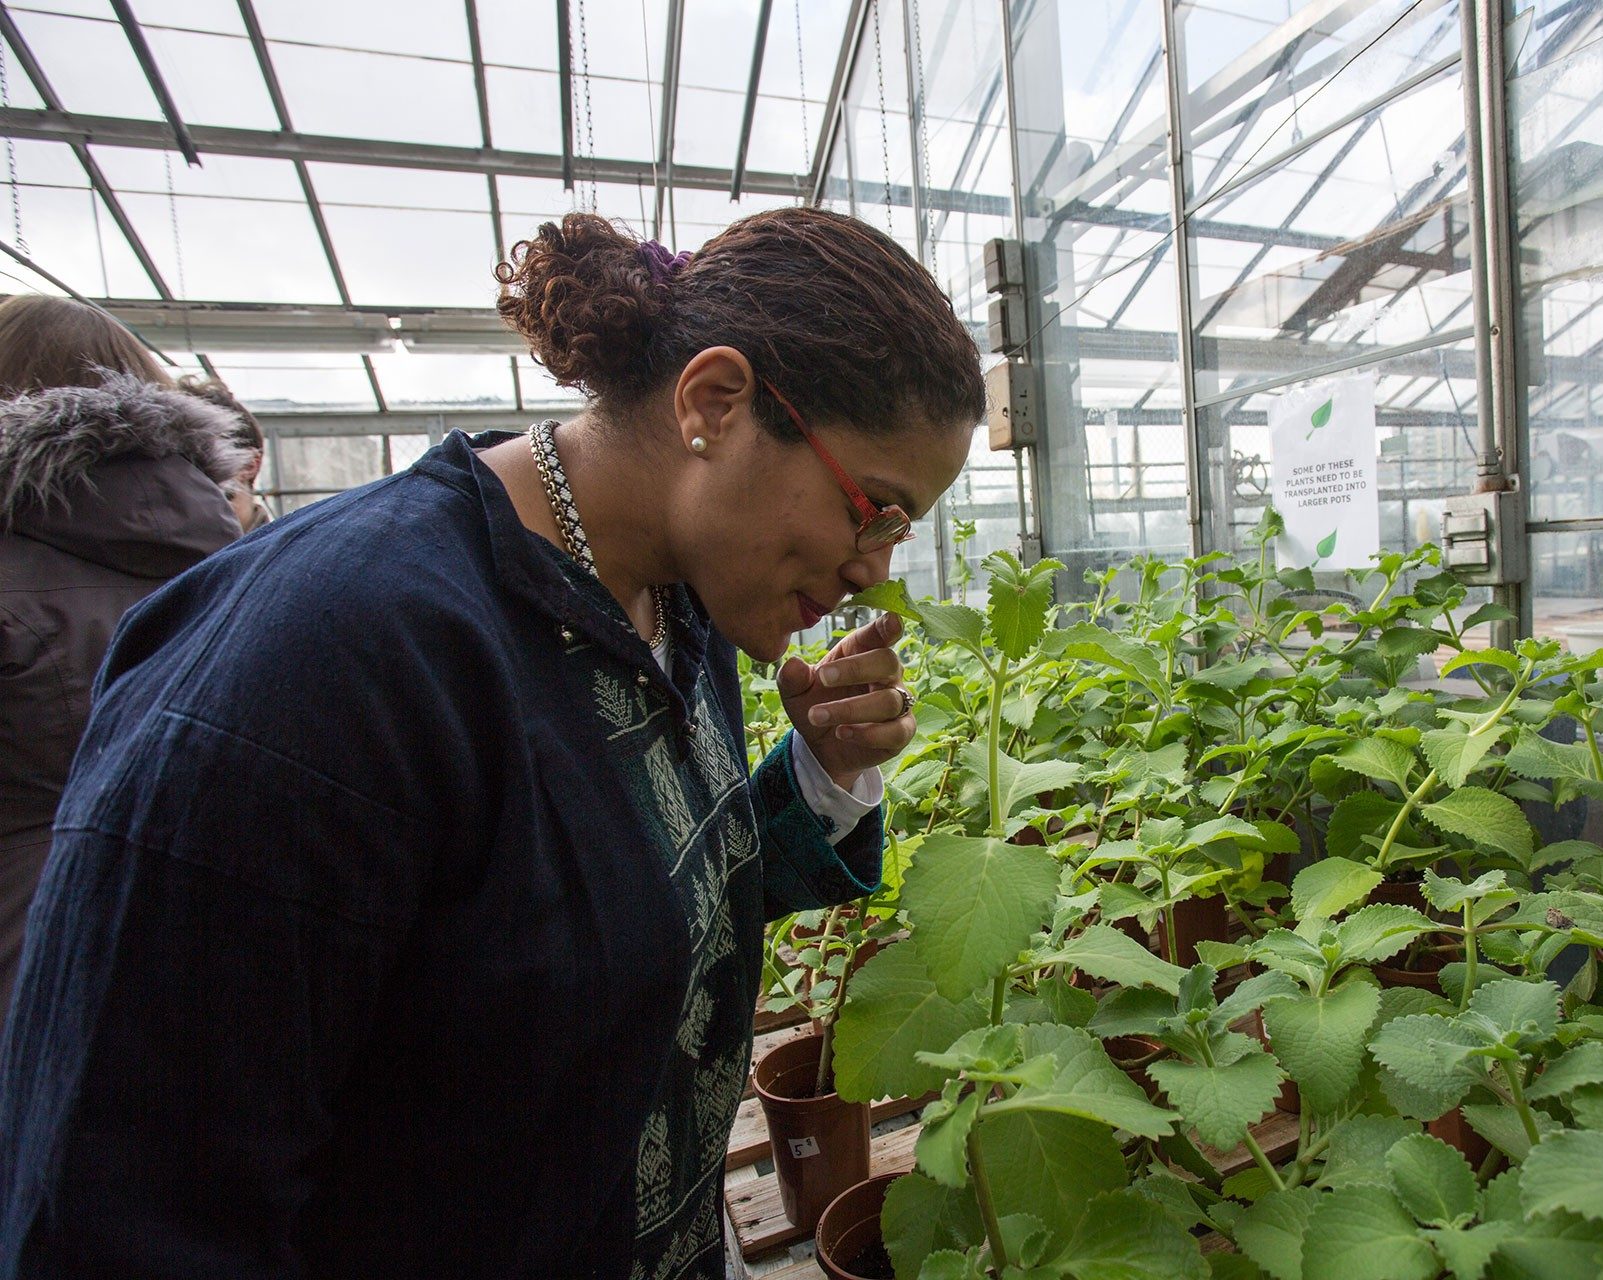 A woman stands next to an abundance of seedlings in the greenhouse. She grins as she brings a leaf up to her nose to sniff.